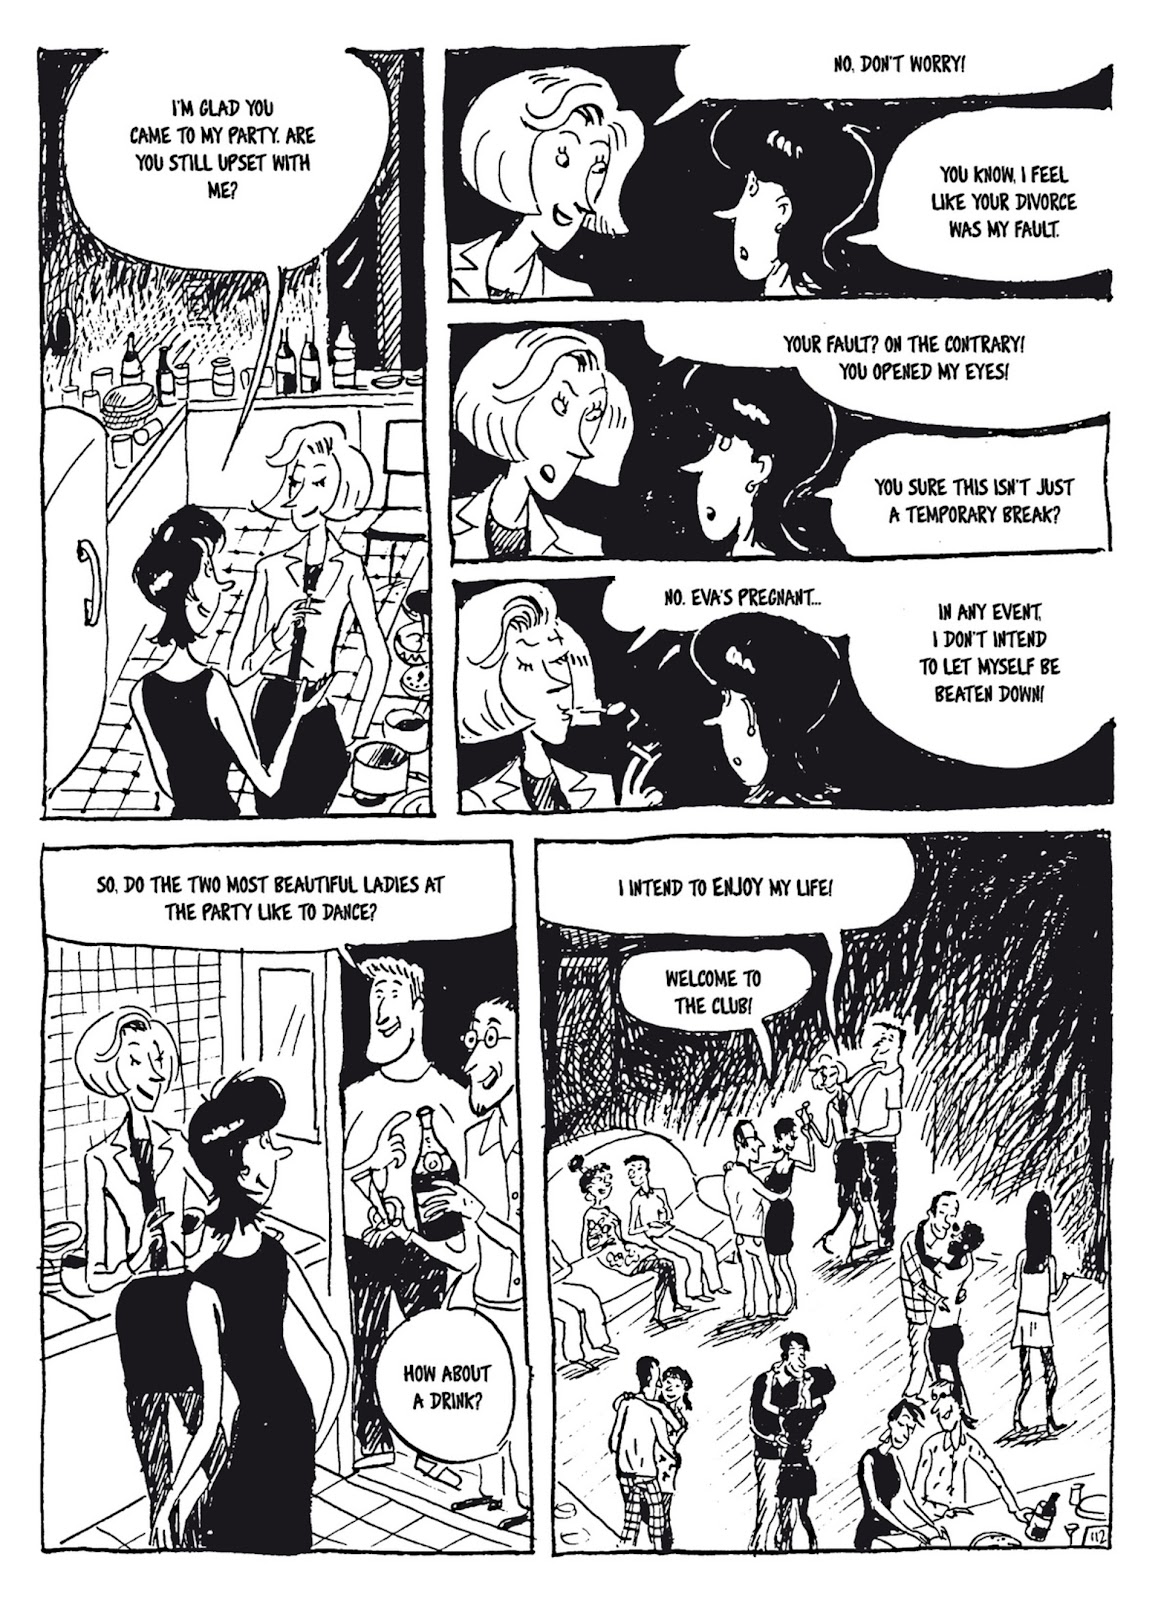 Bluesy Lucy - The Existential Chronicles of a Thirtysomething issue 2 - Page 64